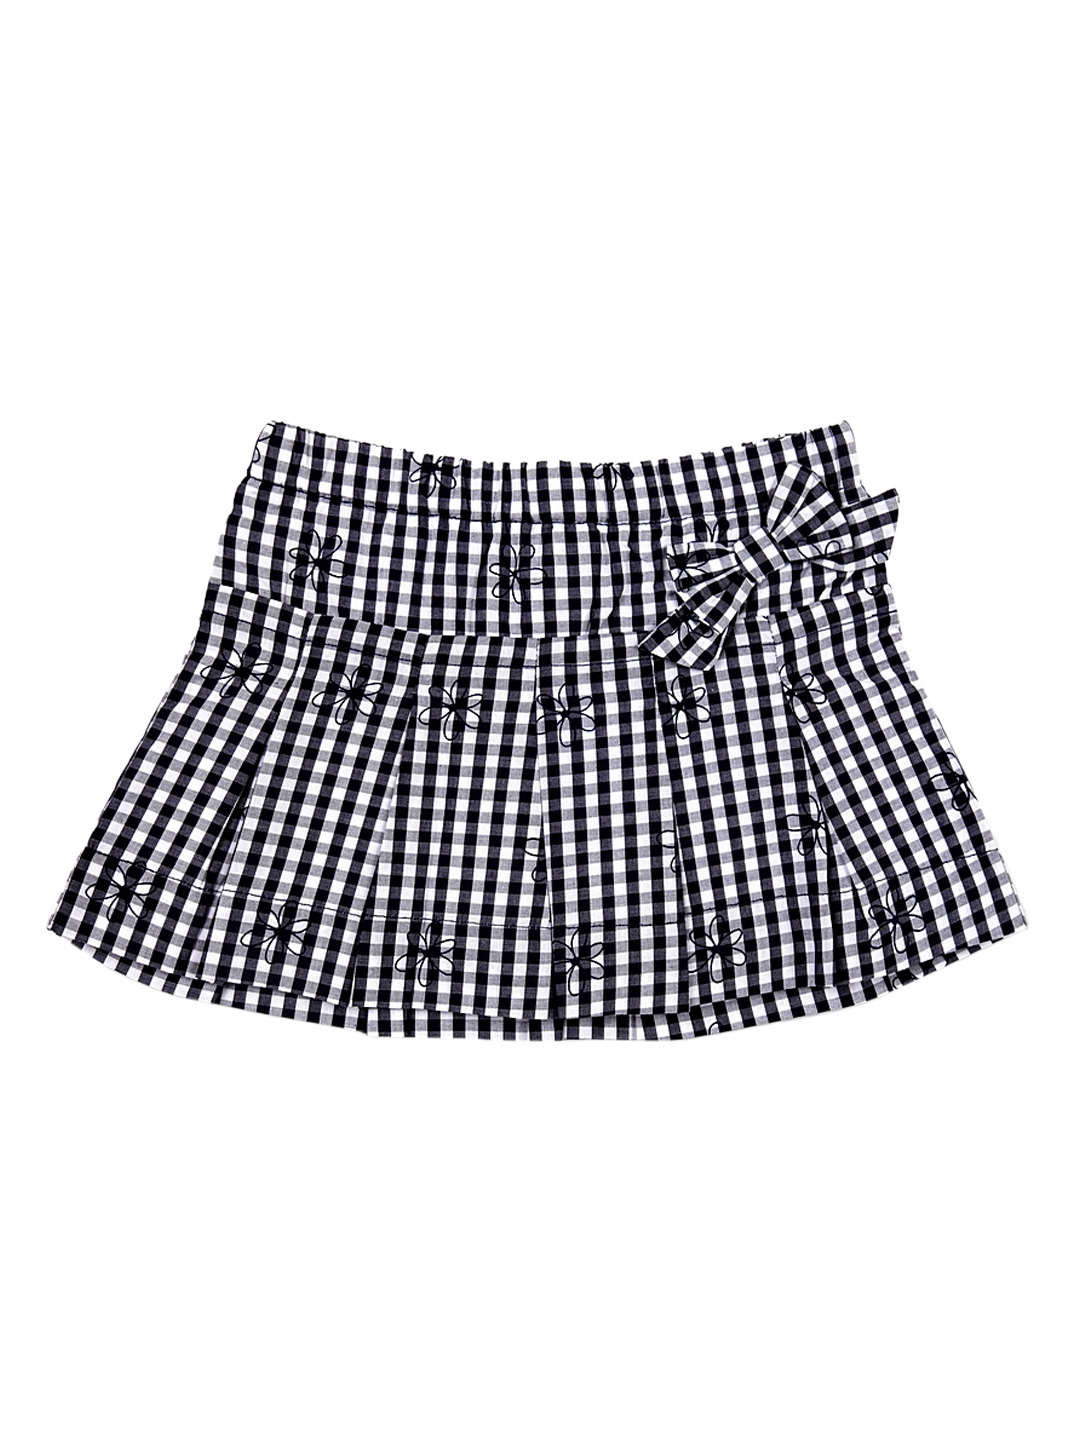 Buy Chicco Infant Girls Navy Blue & White Checked A Line Skirt - Skirts ...